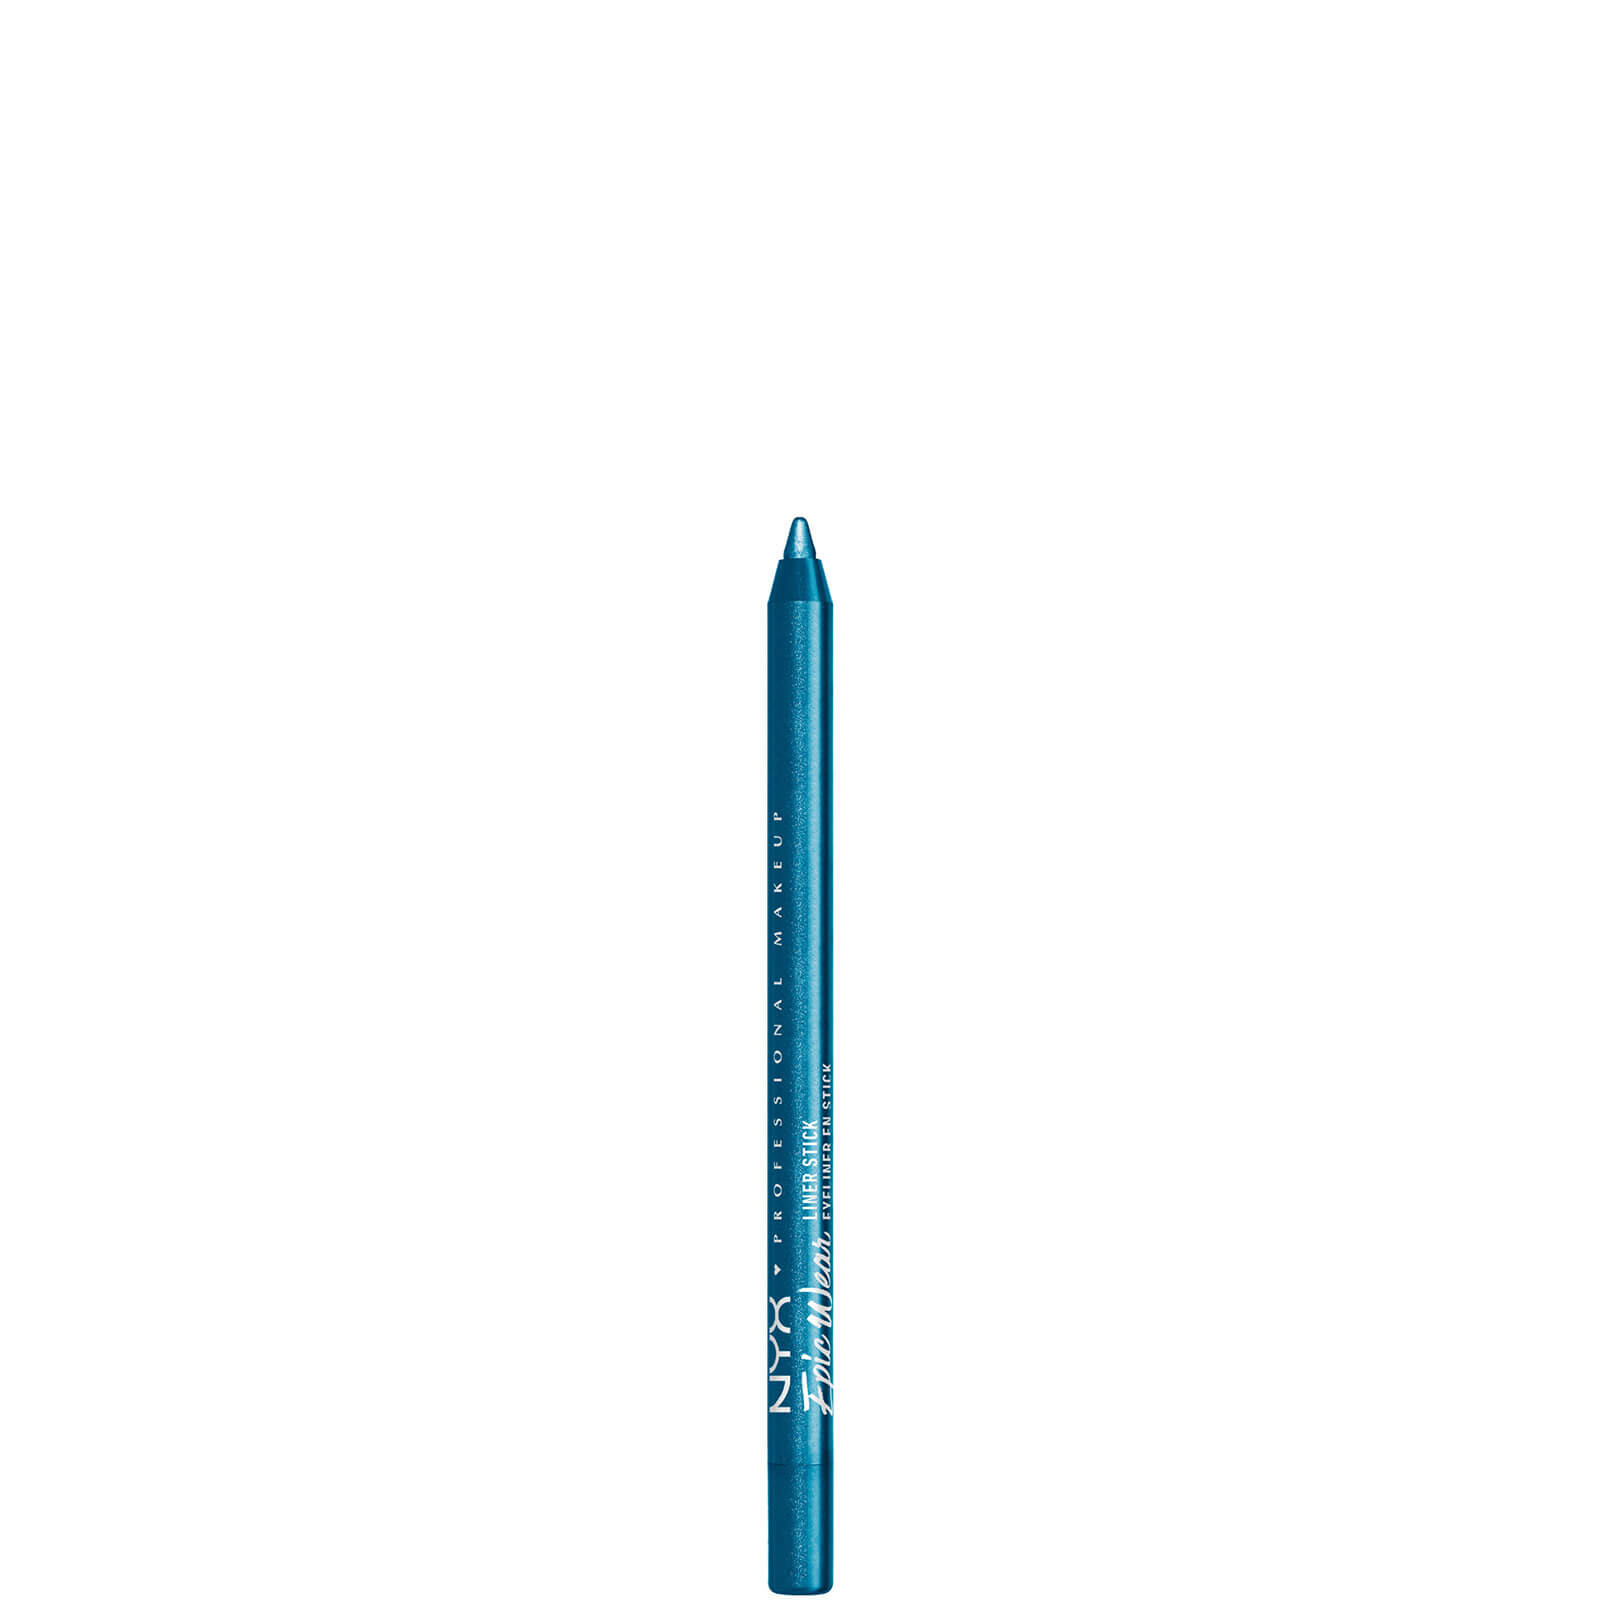 NYX Professional Makeup Epic Wear Long Lasting Liner Stick 1.22g (Various Shades) - Turquoise Storm